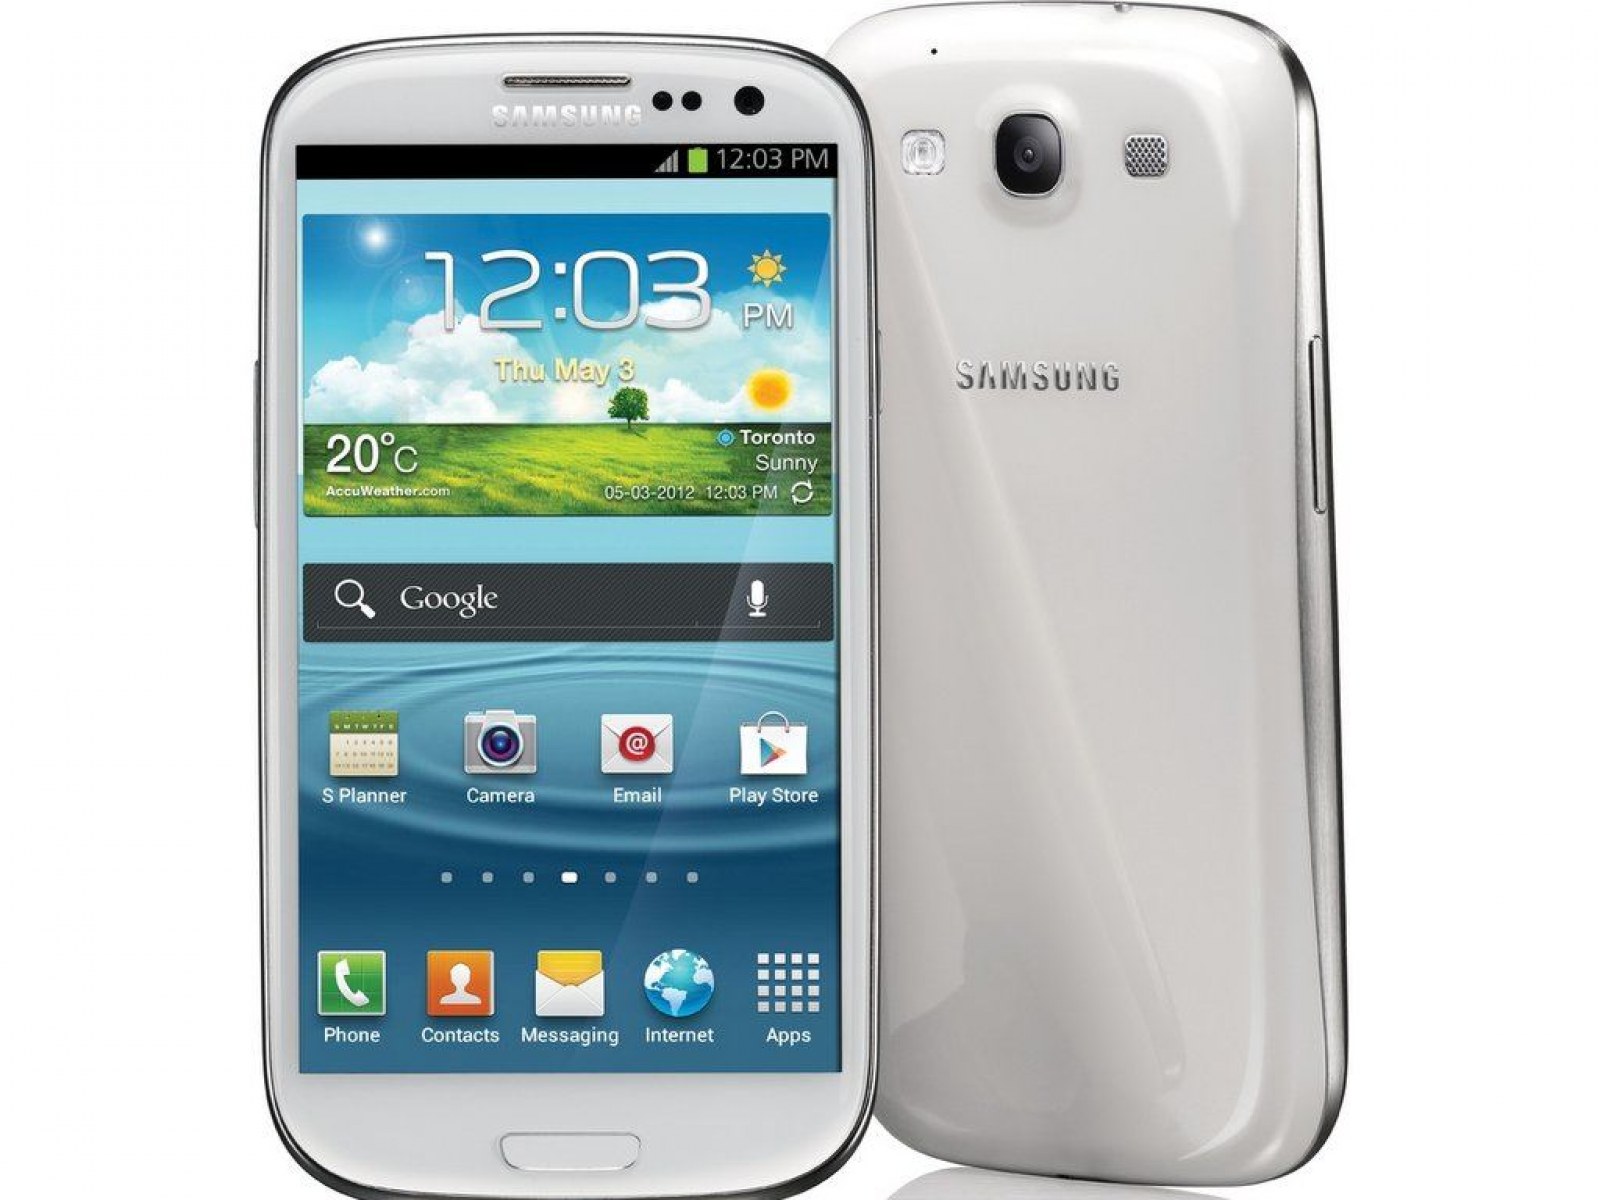 How To Update Samsung Galaxy S3 To 4.4